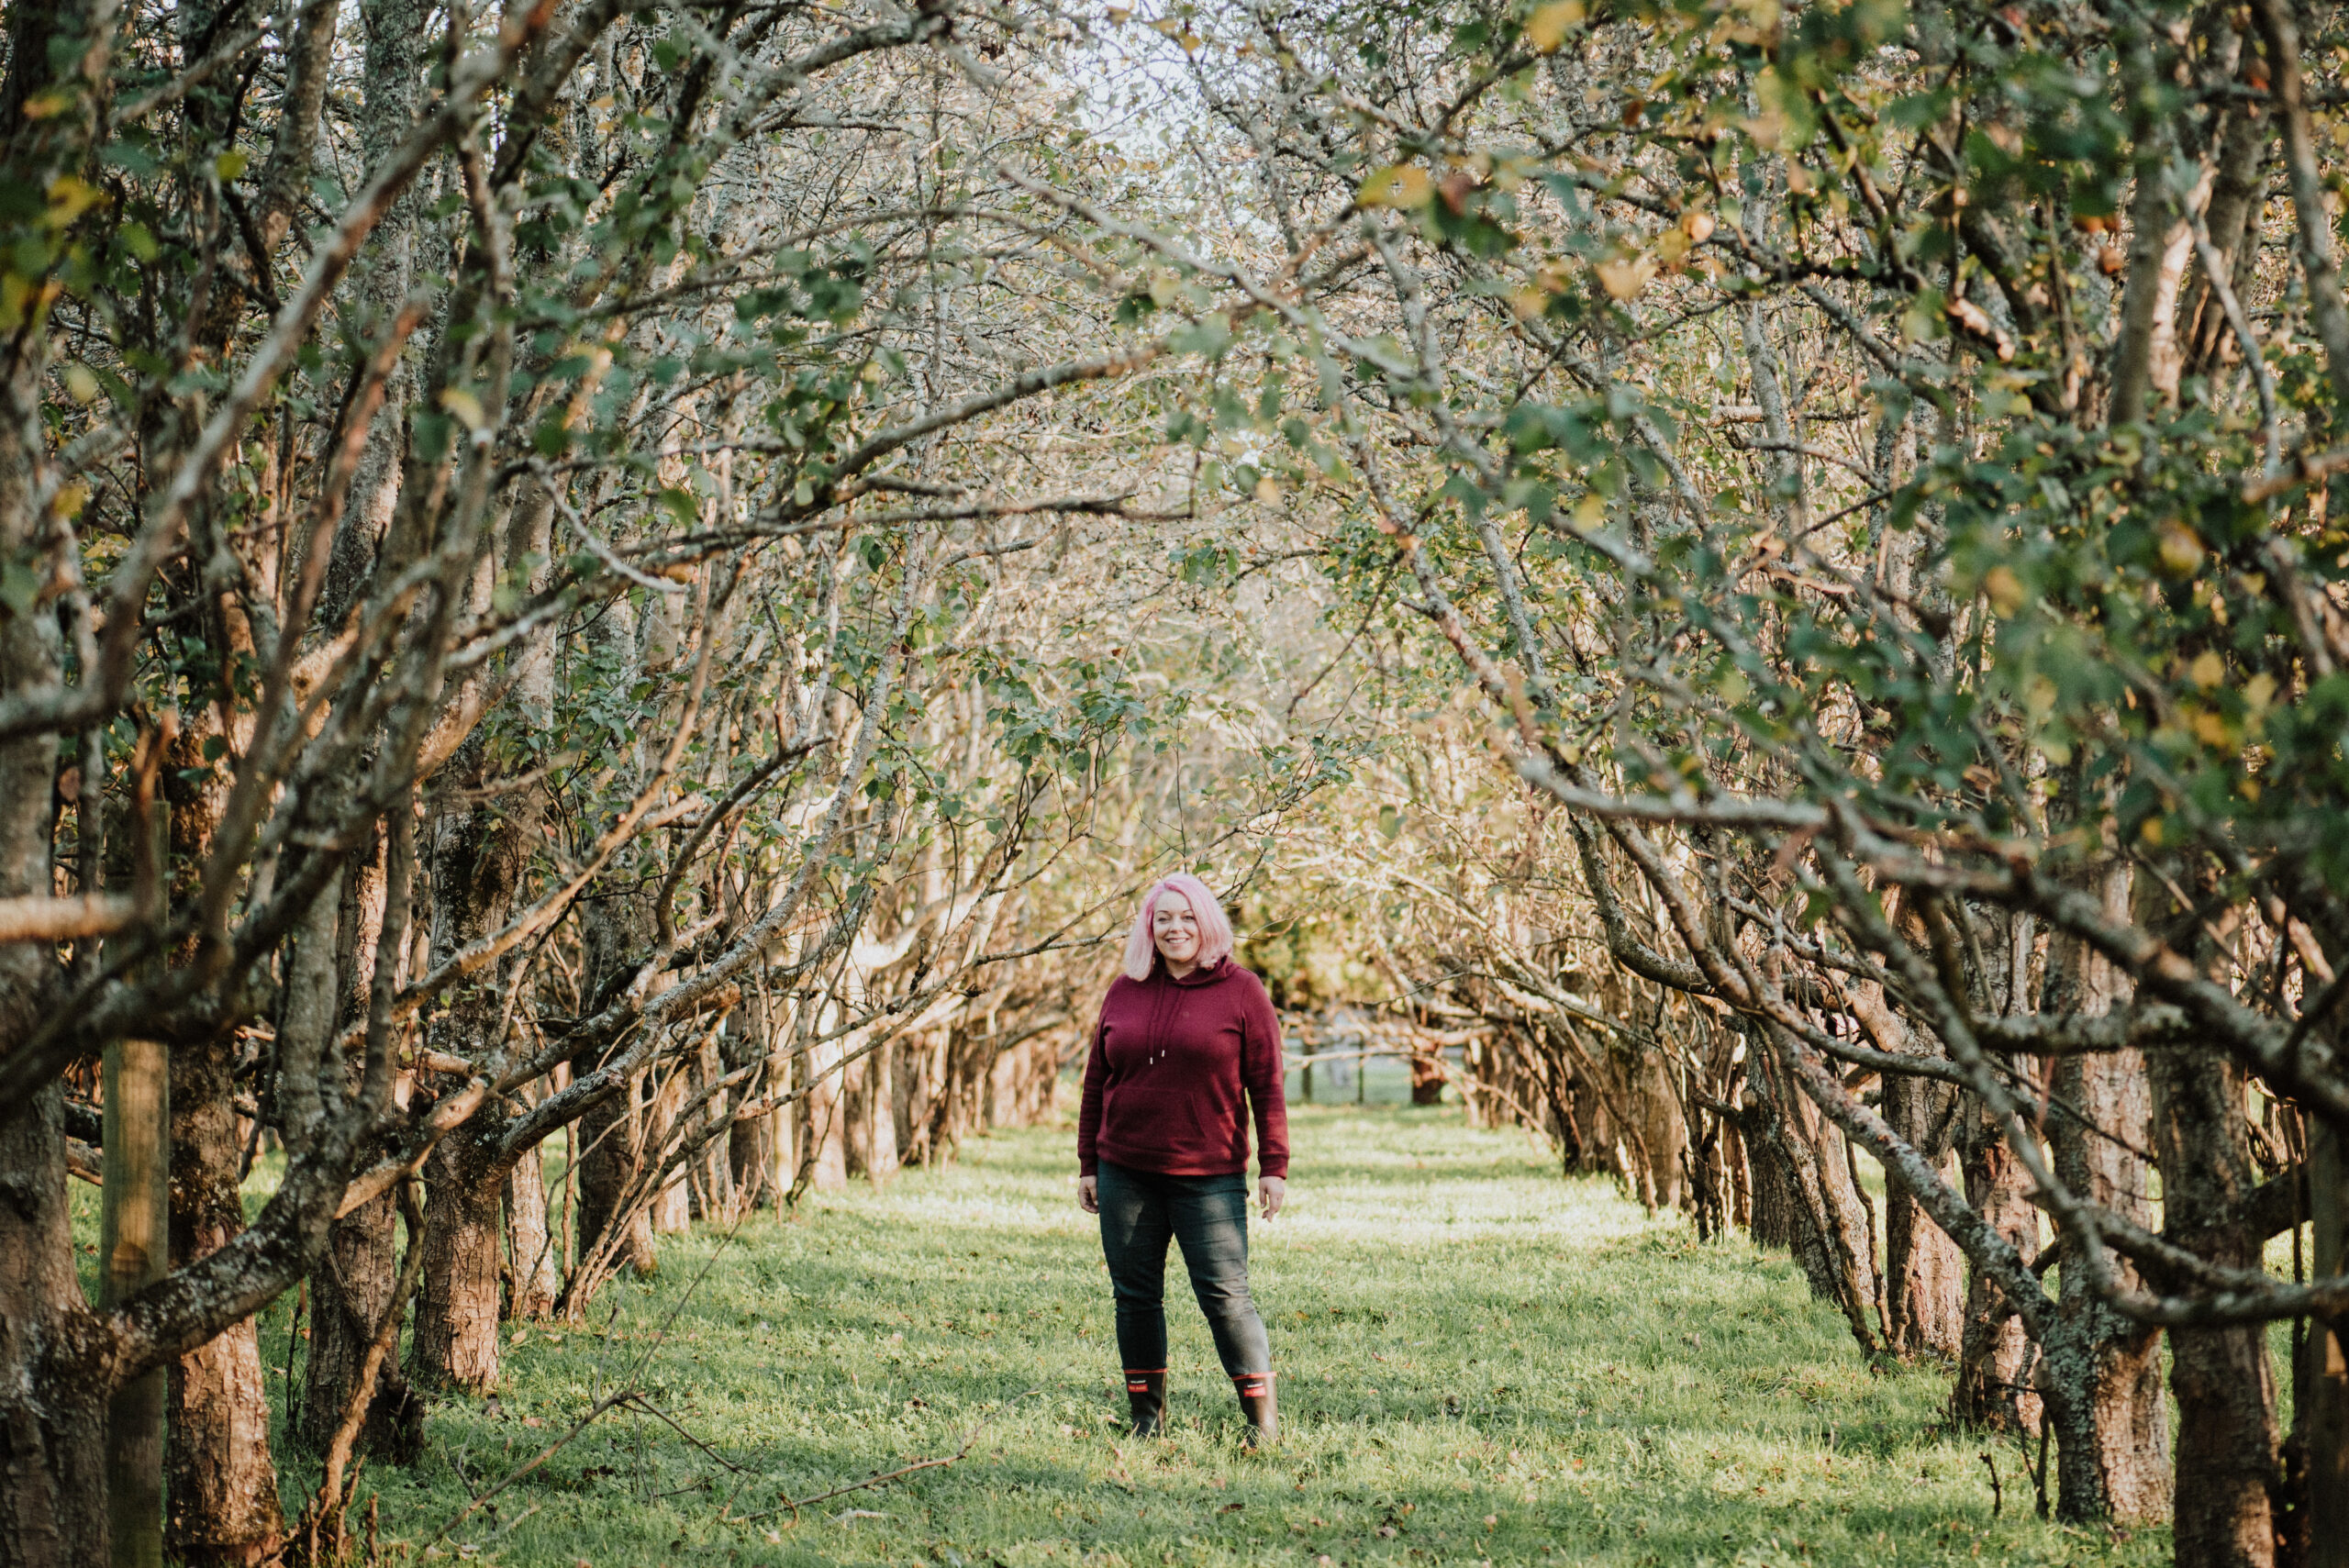 Nikki in her pear orchard